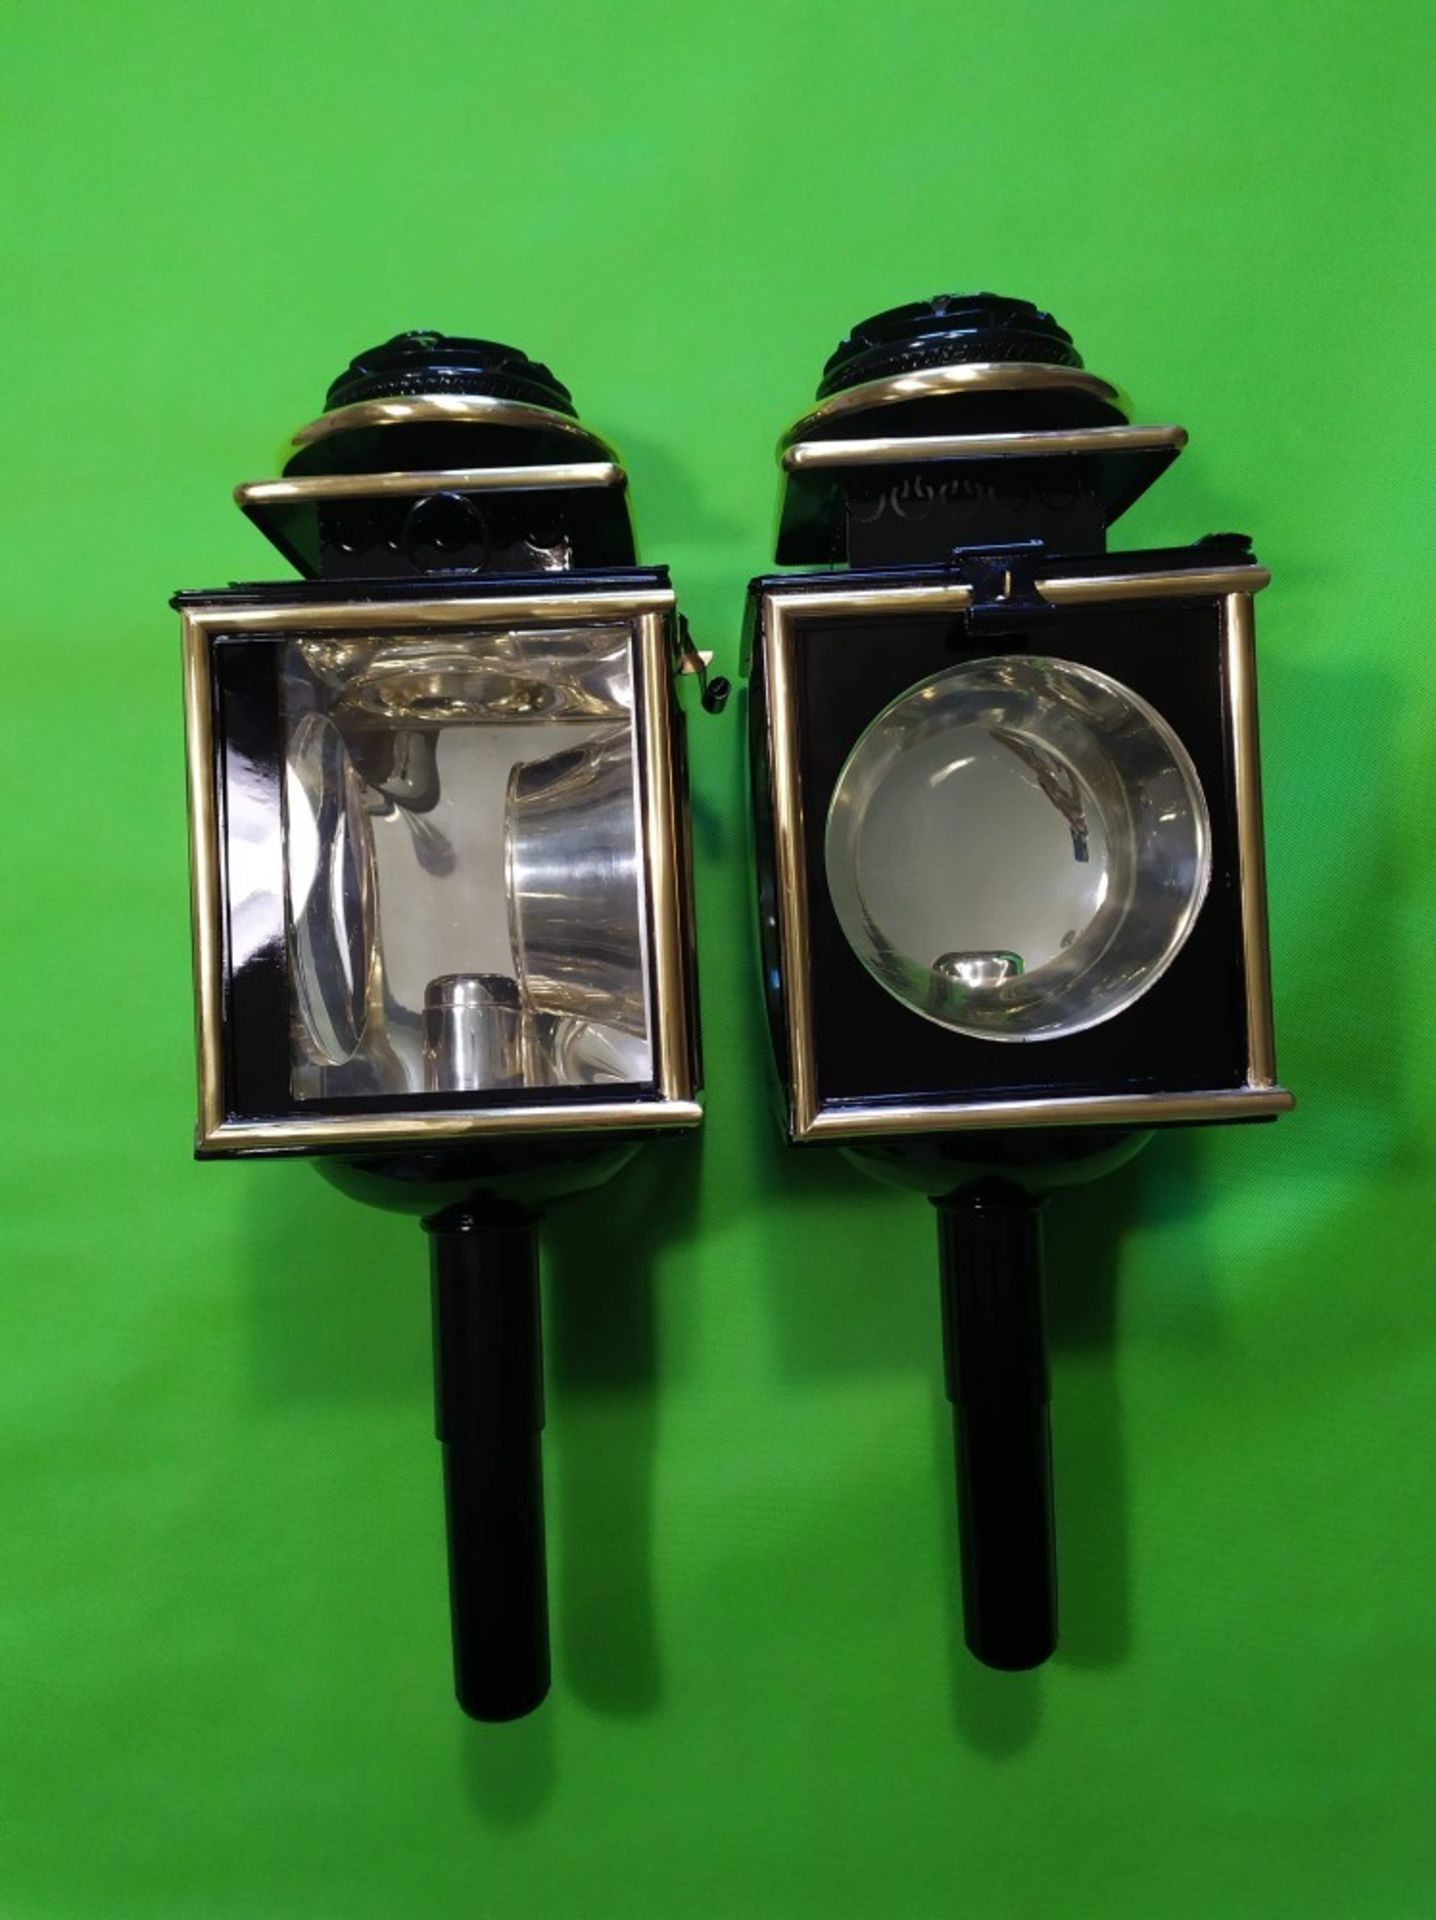 Pair of new black/brass Coach lamps with silvered interiors measuring 54cms long.